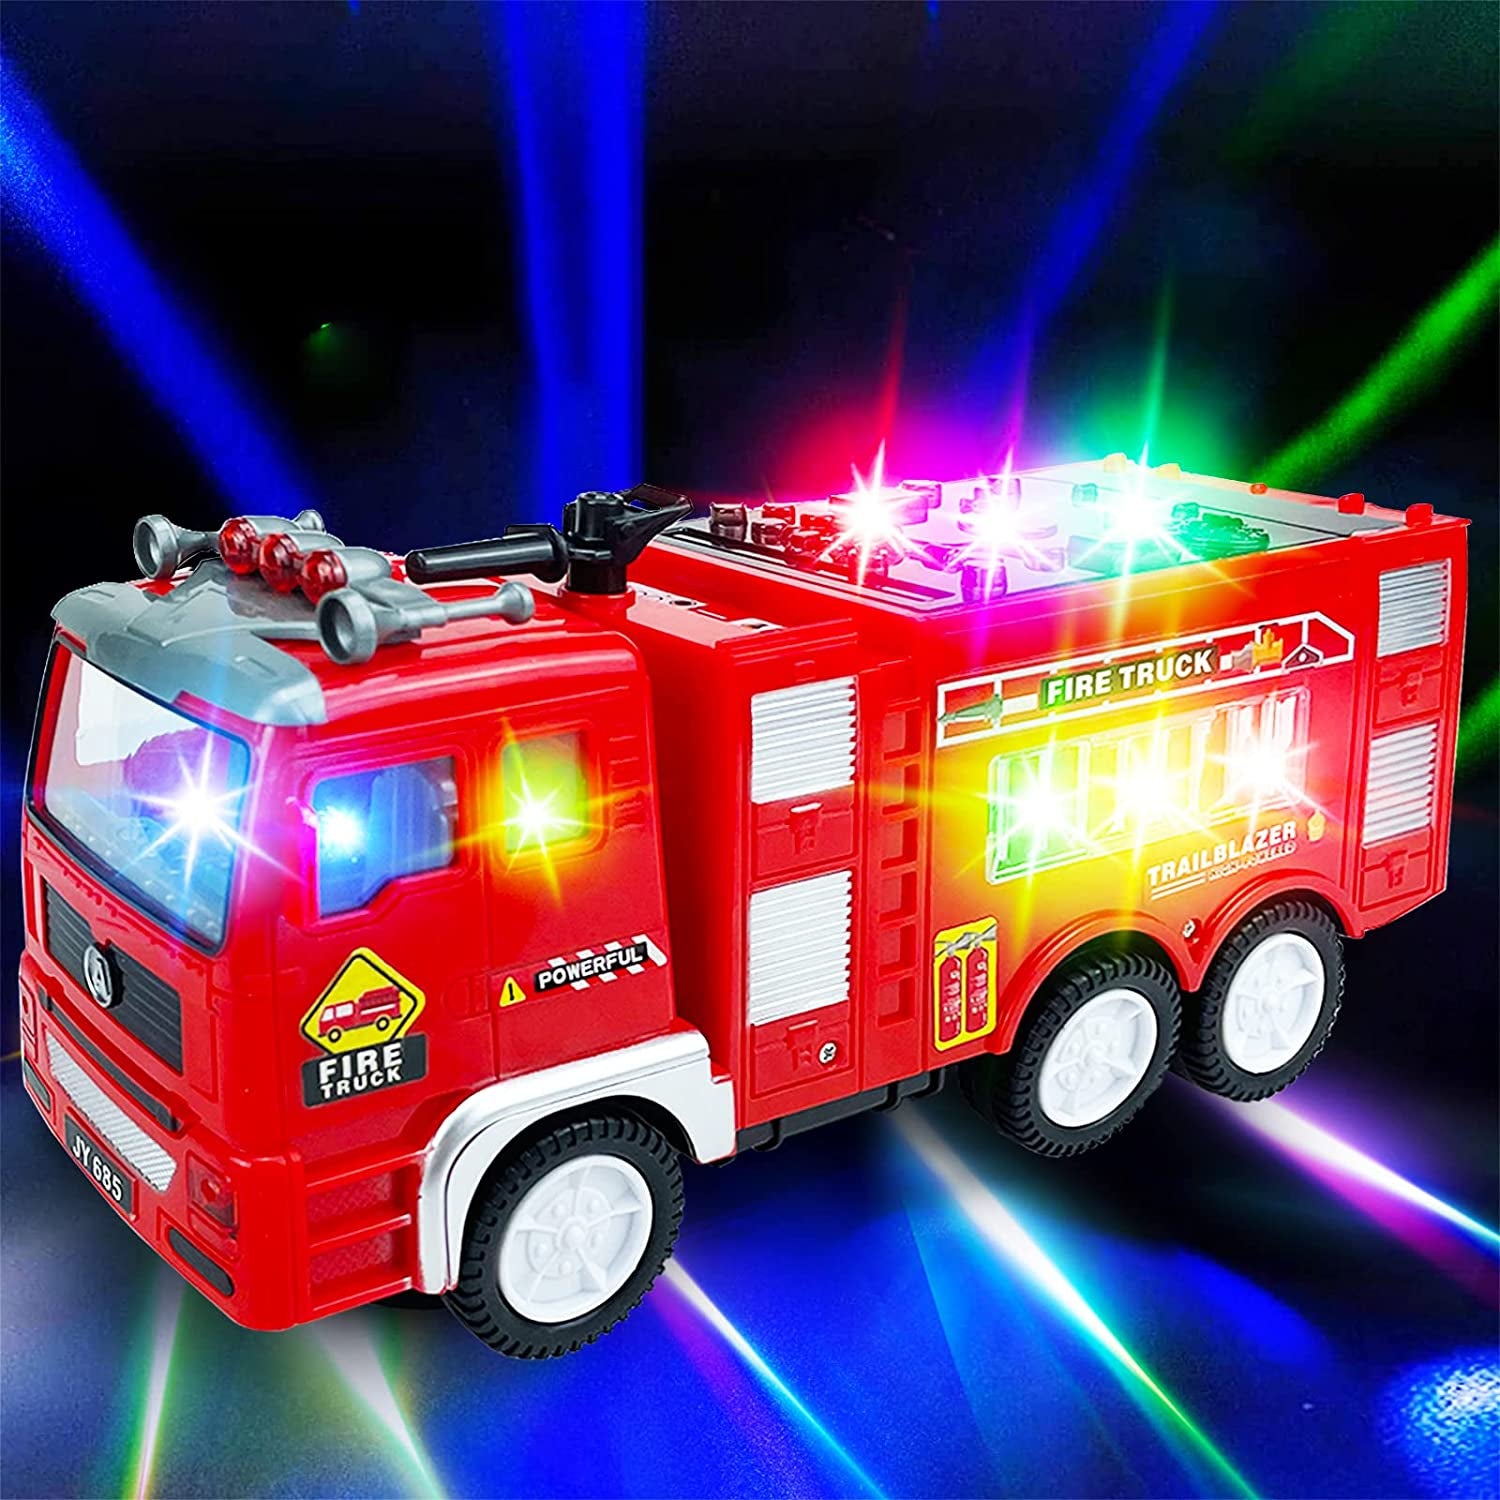 4D Lights up Trucks Toys for 3 4 5 6 Year Old Boys Girls,Toddler Toys Electric Fire Truck with Bright Flashing Lights and Sounds,Bump&Go Car Toy for Imaginative Play(Fire Truck)